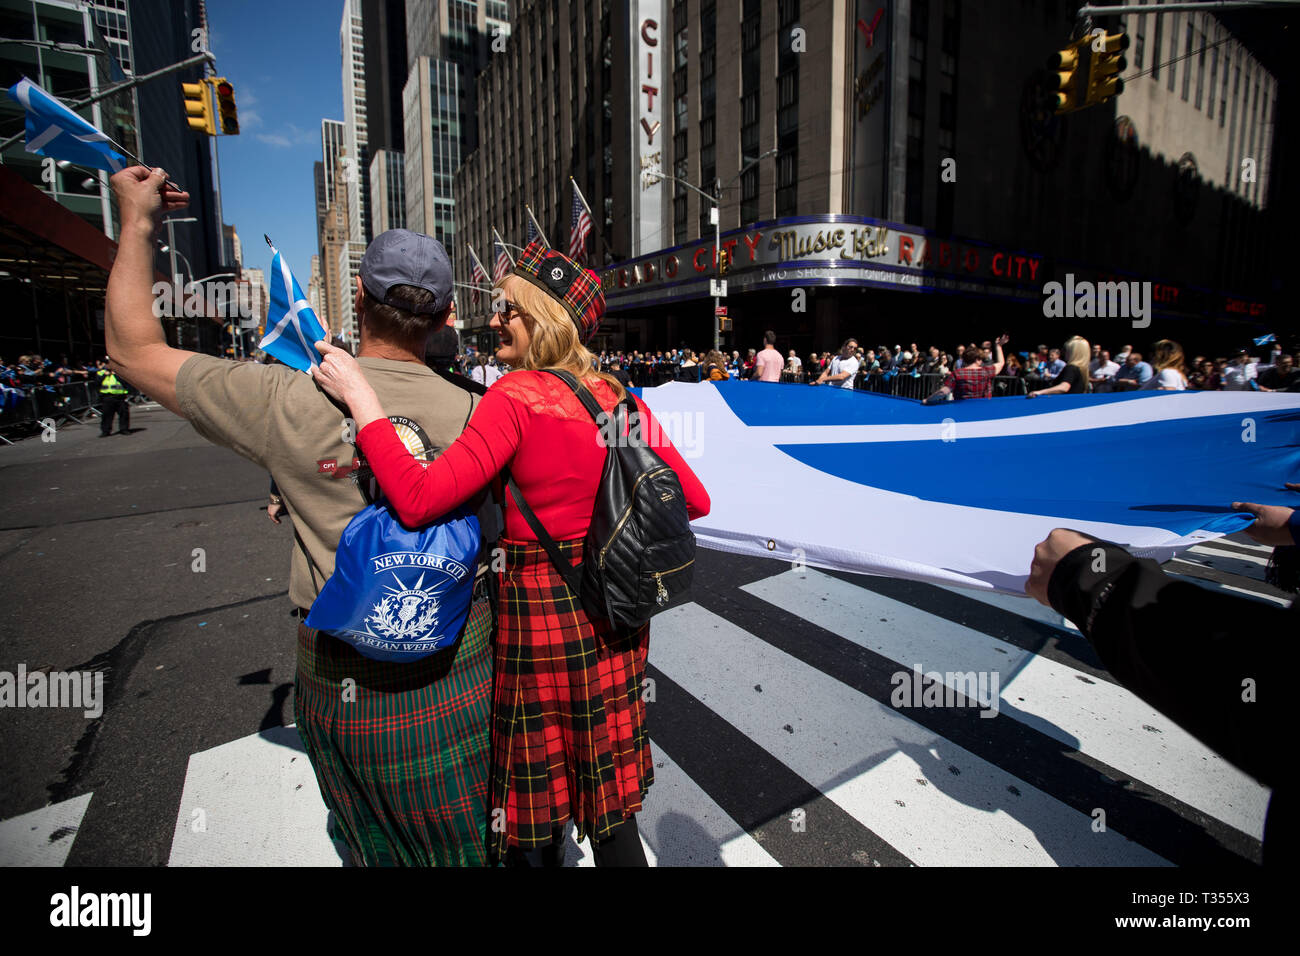 New York, USA. 6th Apr, 2019. Participants carry a giant Scottish flag during the annual Tartan Day Parade in New York, the United States, on April 6, 2019. The parade, which consists of drummers, pipers and dancers, celebrated Scottish and Scottish American heritage. In 1998 the U.S. Senate declared April 6 to be National Tartan Day to recognize the contributions made by Scottish Americans to the United States. Credit: Michael Nagle/Xinhua/Alamy Live News Stock Photo